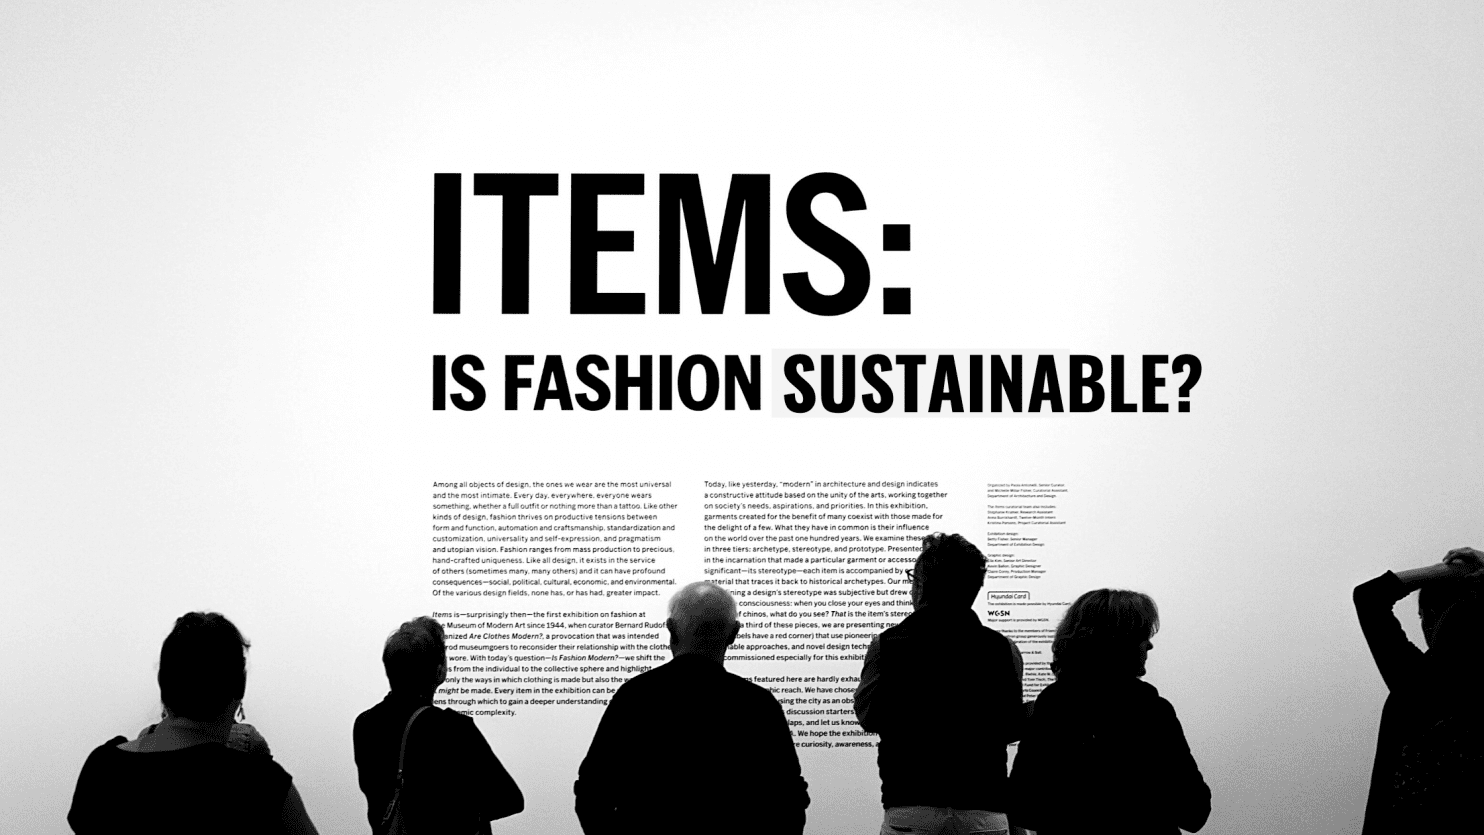 Black and white image of people looking at a art exhibit description that says "Items: Is Fashion Sustainable?"